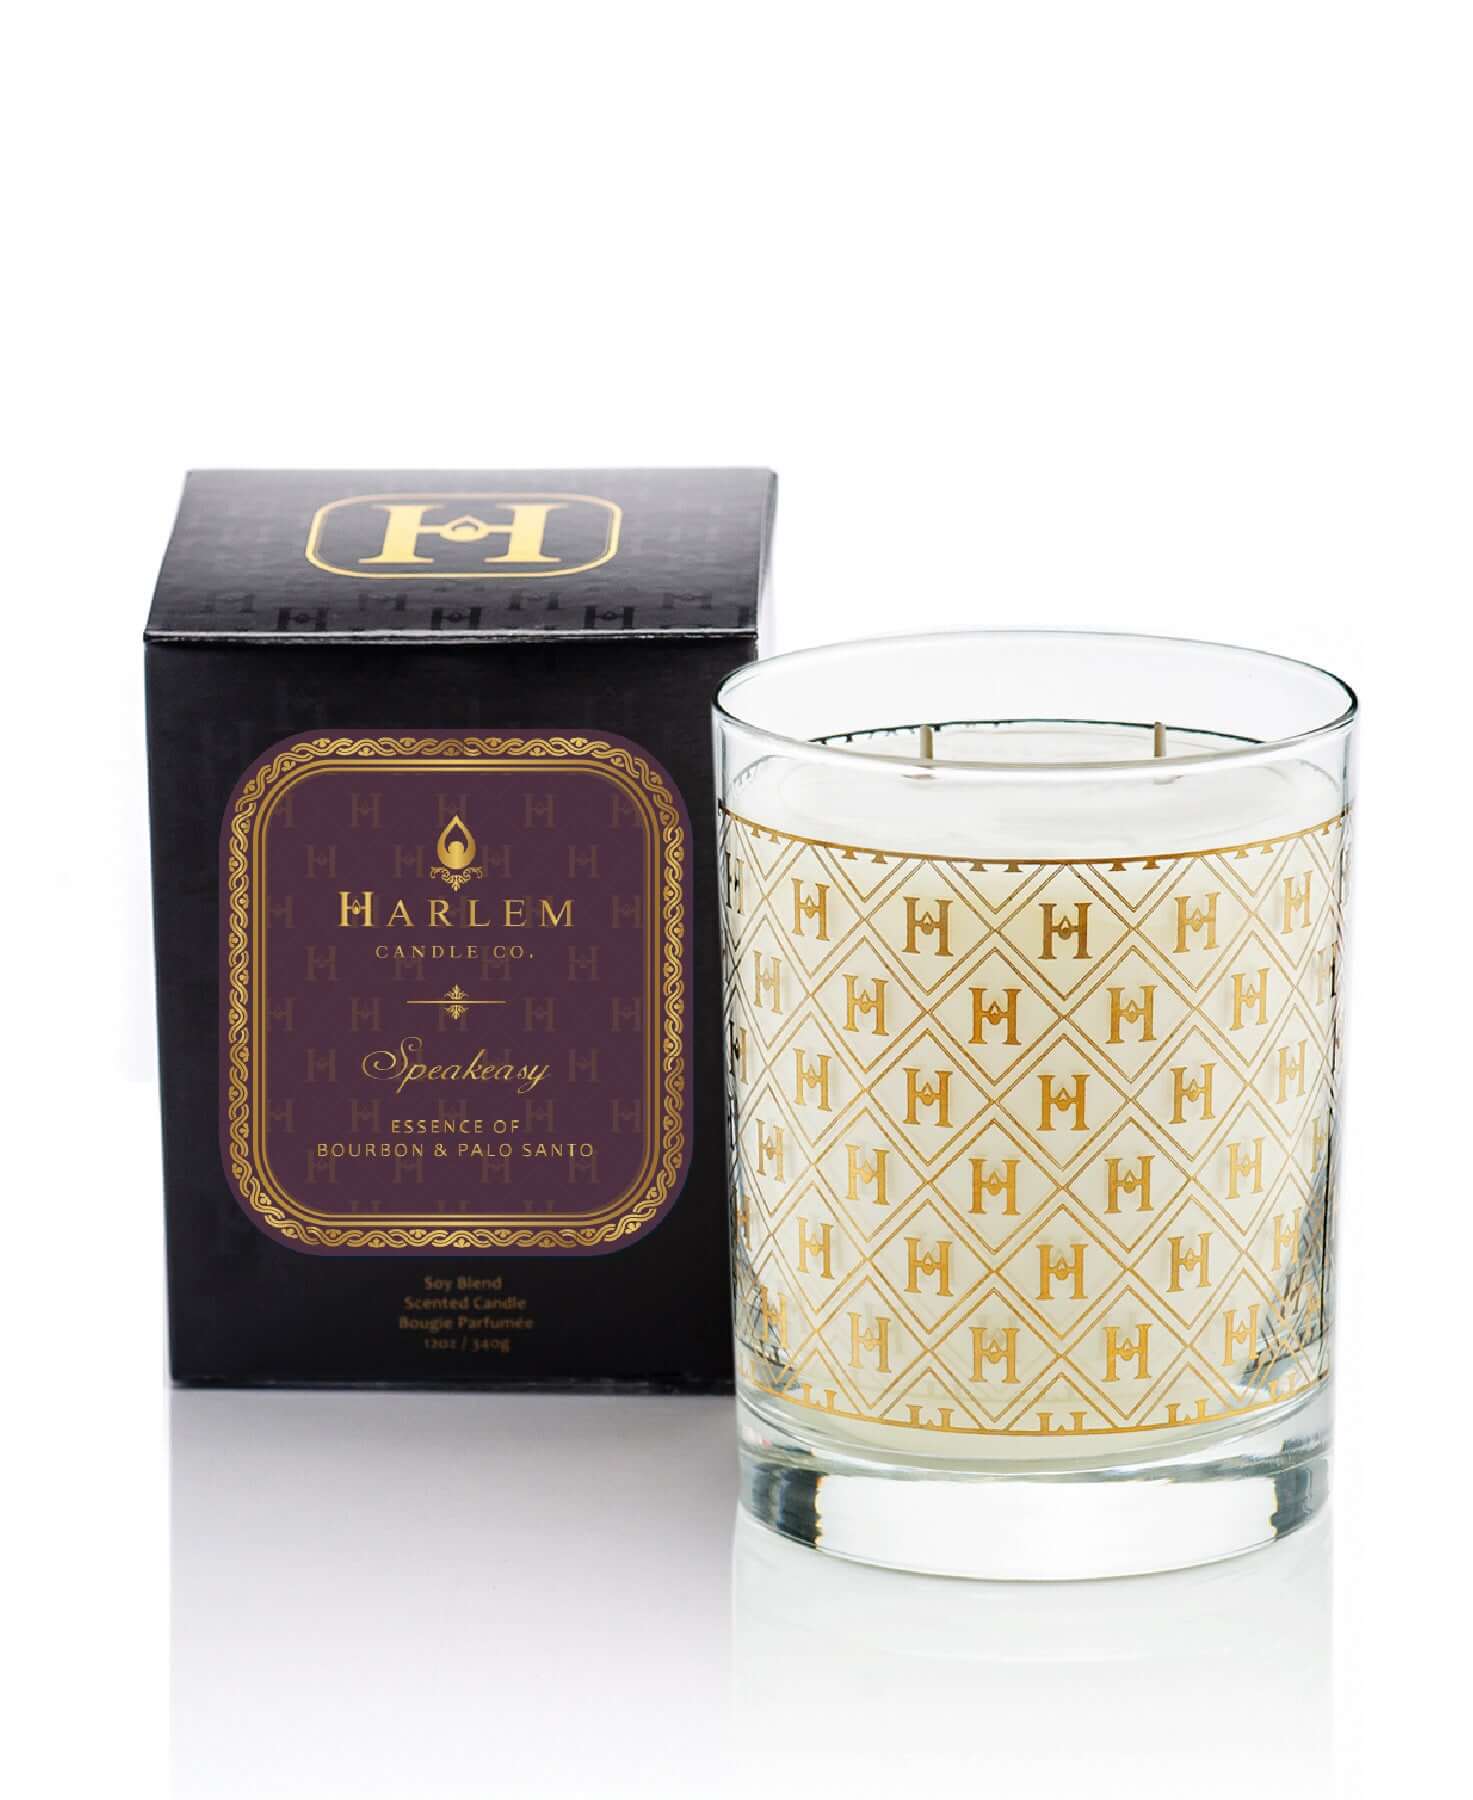 Our stunning 12 oz 22k Cocktail Glass Luxury Speakeasy Candle with the 22K Gold H pattern on clear glass sitting next to its decorative box on a white background.